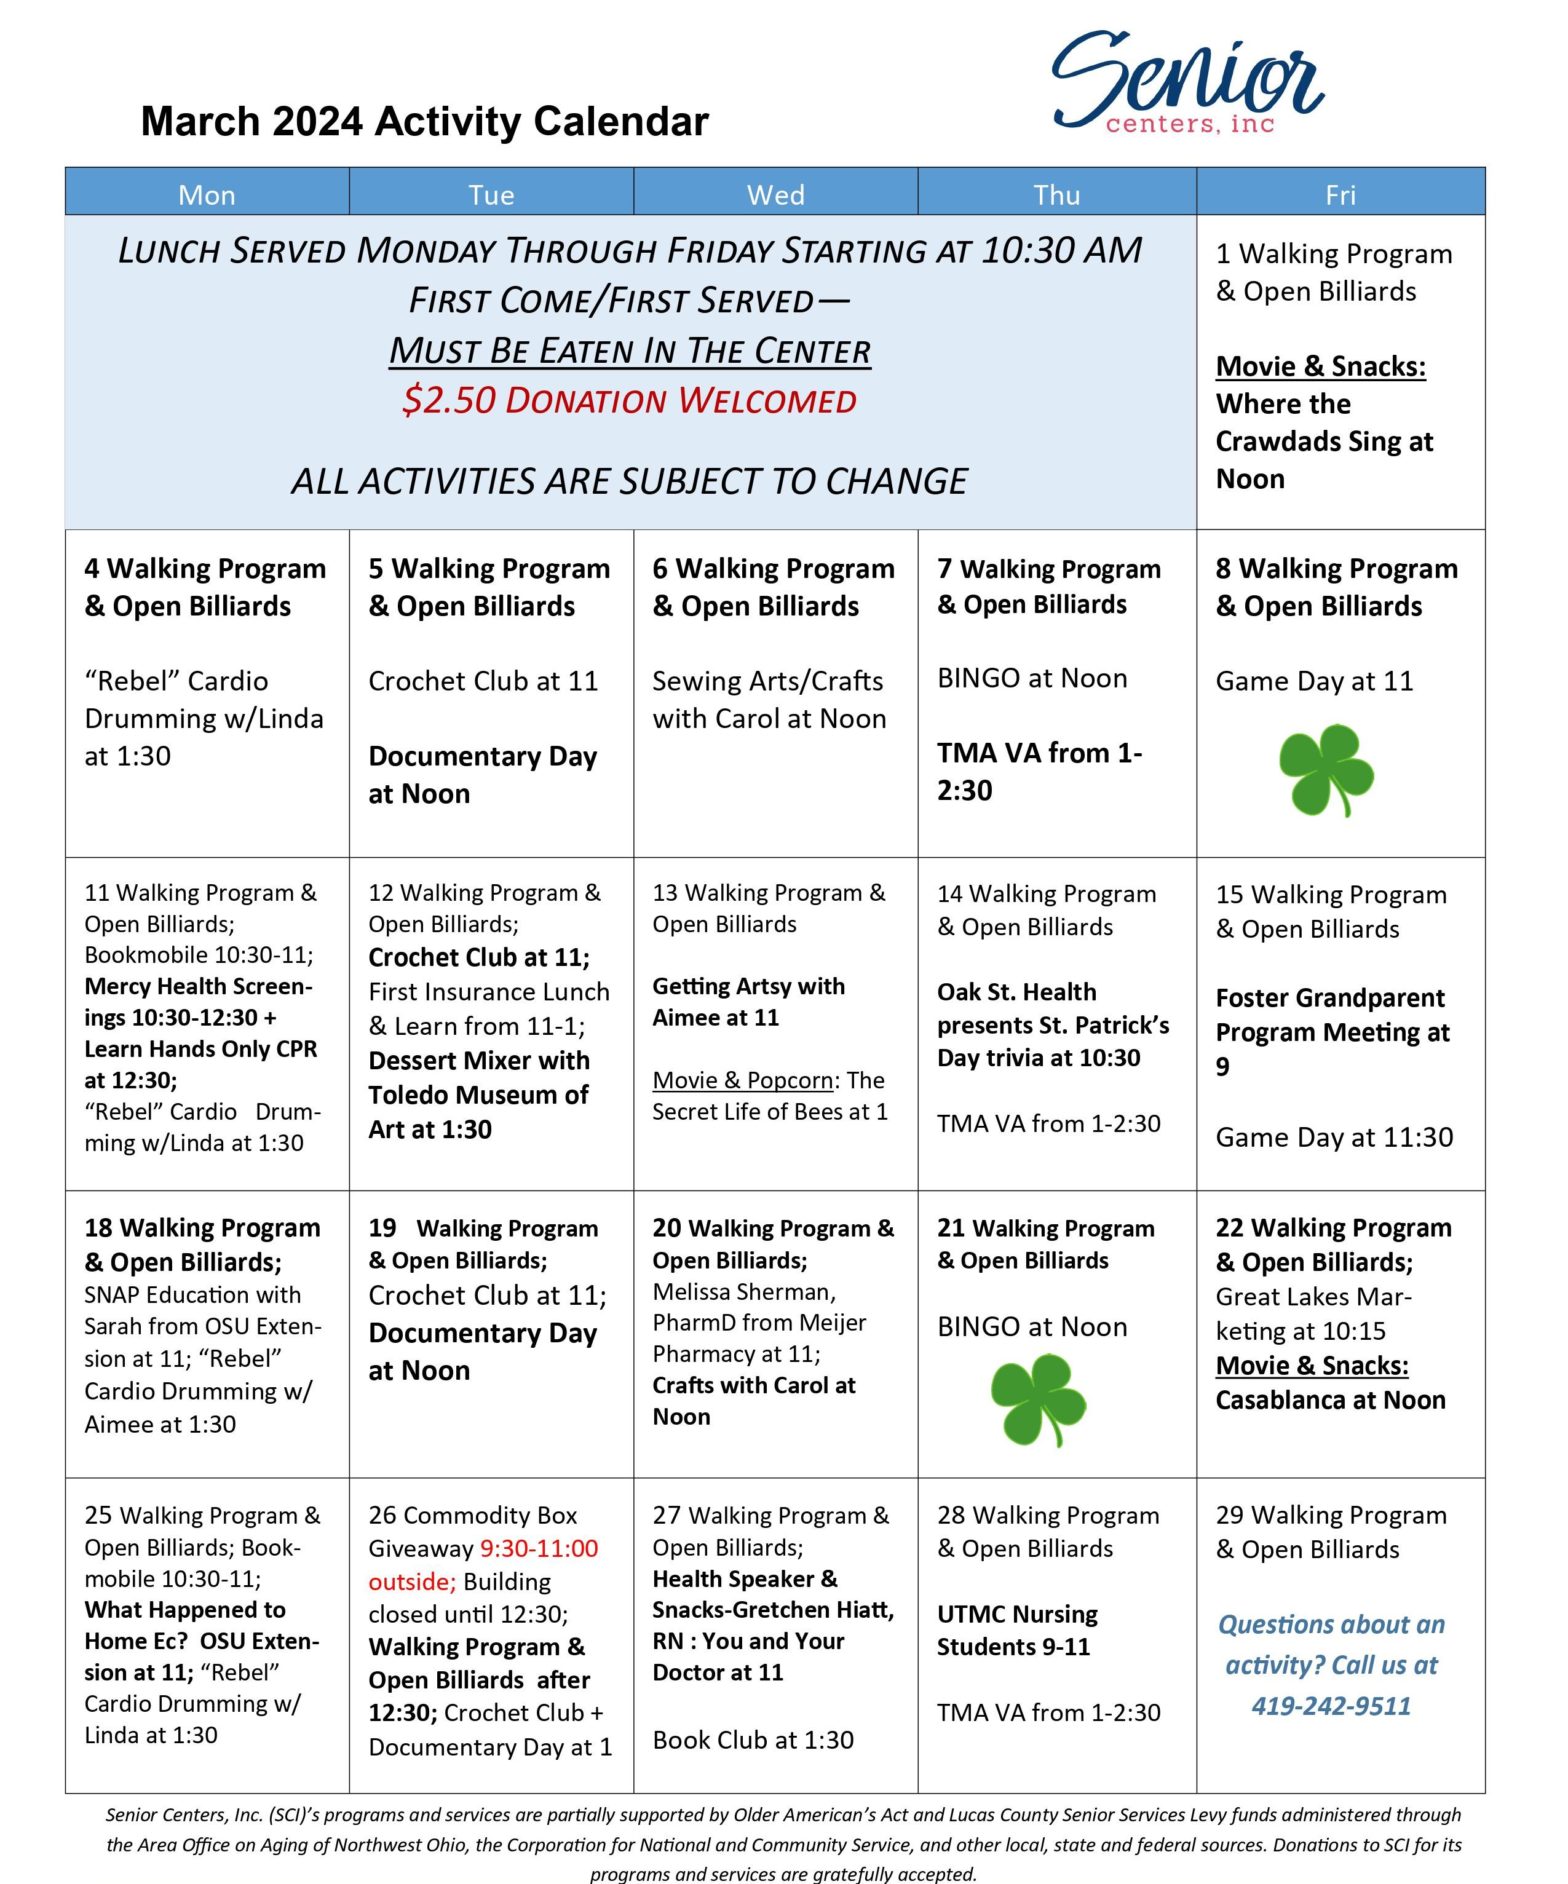 March 2024 Newsletter and Activity Calendar – Senior Centers, Inc.